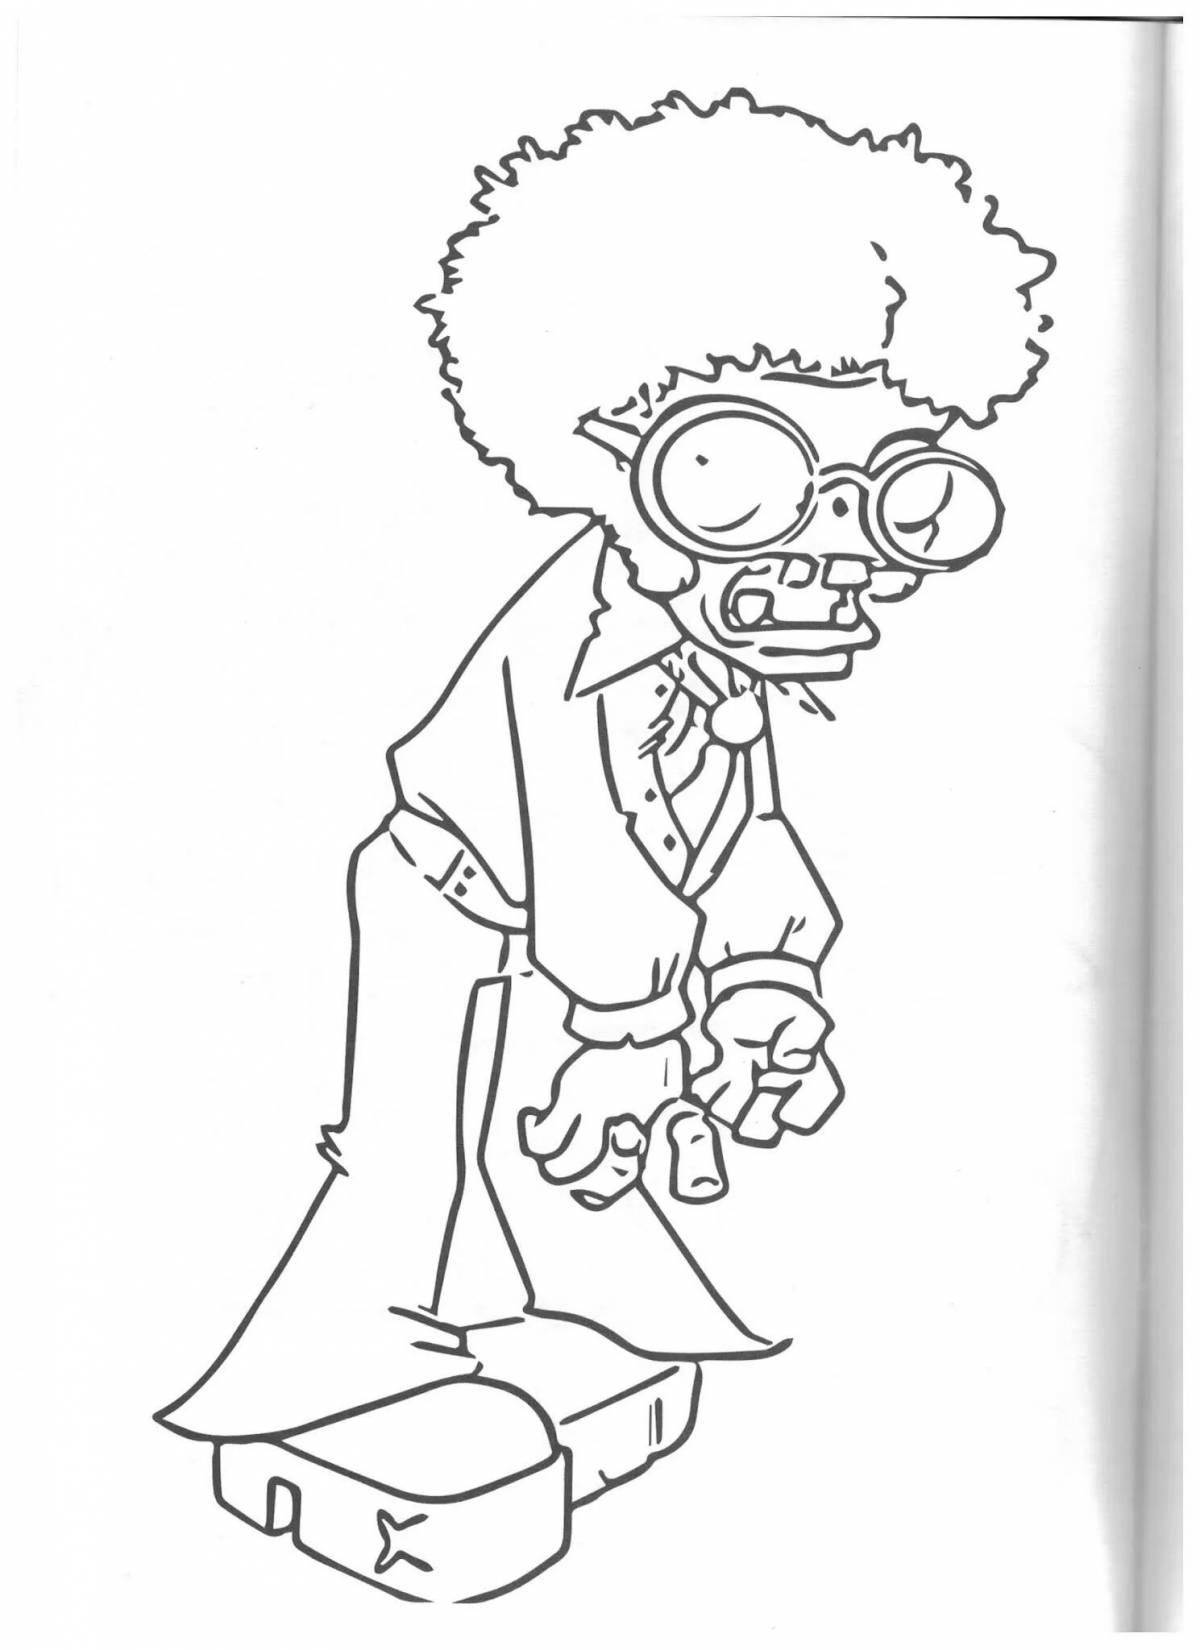 Dr Zombie Boss Spectacular Coloring Page